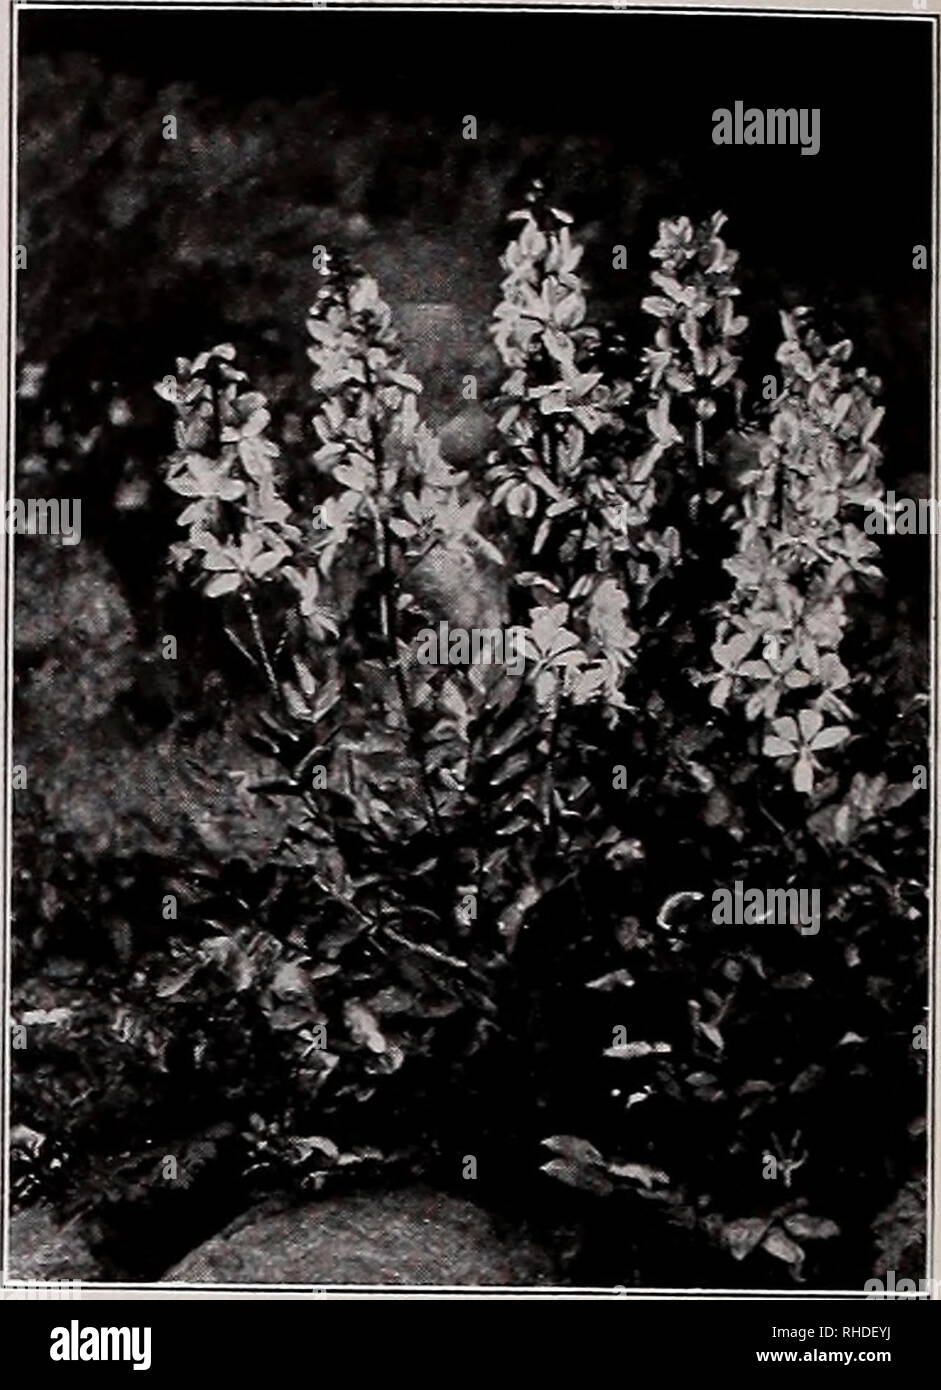 . Book for florists. Flowers Seeds Catalogs; Bulbs (Plants) Seedlings Catalogs; Vegetables Seeds Catalogs; Trees Seeds Catalogs; Horticulture Equipment and supplies Catalogs. SWEET WILLIAM fDianthus Barbatus) DIANTHUS-BARBATUSâSweet William EDELWEISS DICTAMNUS Fraxinella (Gas Plant) â â Trade pkt. Oz. Double Blood-red (Atrosanguineus pi.) $0.20 $1 00 .80 .80 Roseus. Nk Pink. 15 Almost black 15 White. Double Mammoth, Flowered. Mixed... lb., $14.00 Single Albus. White Blood-red (Atrosanguineus) ^15 Coppery Red 15 Diadematus. Crimson with white eye 15 Johnson's Giant. Mixture of large-eyed, dark. Stock Photo